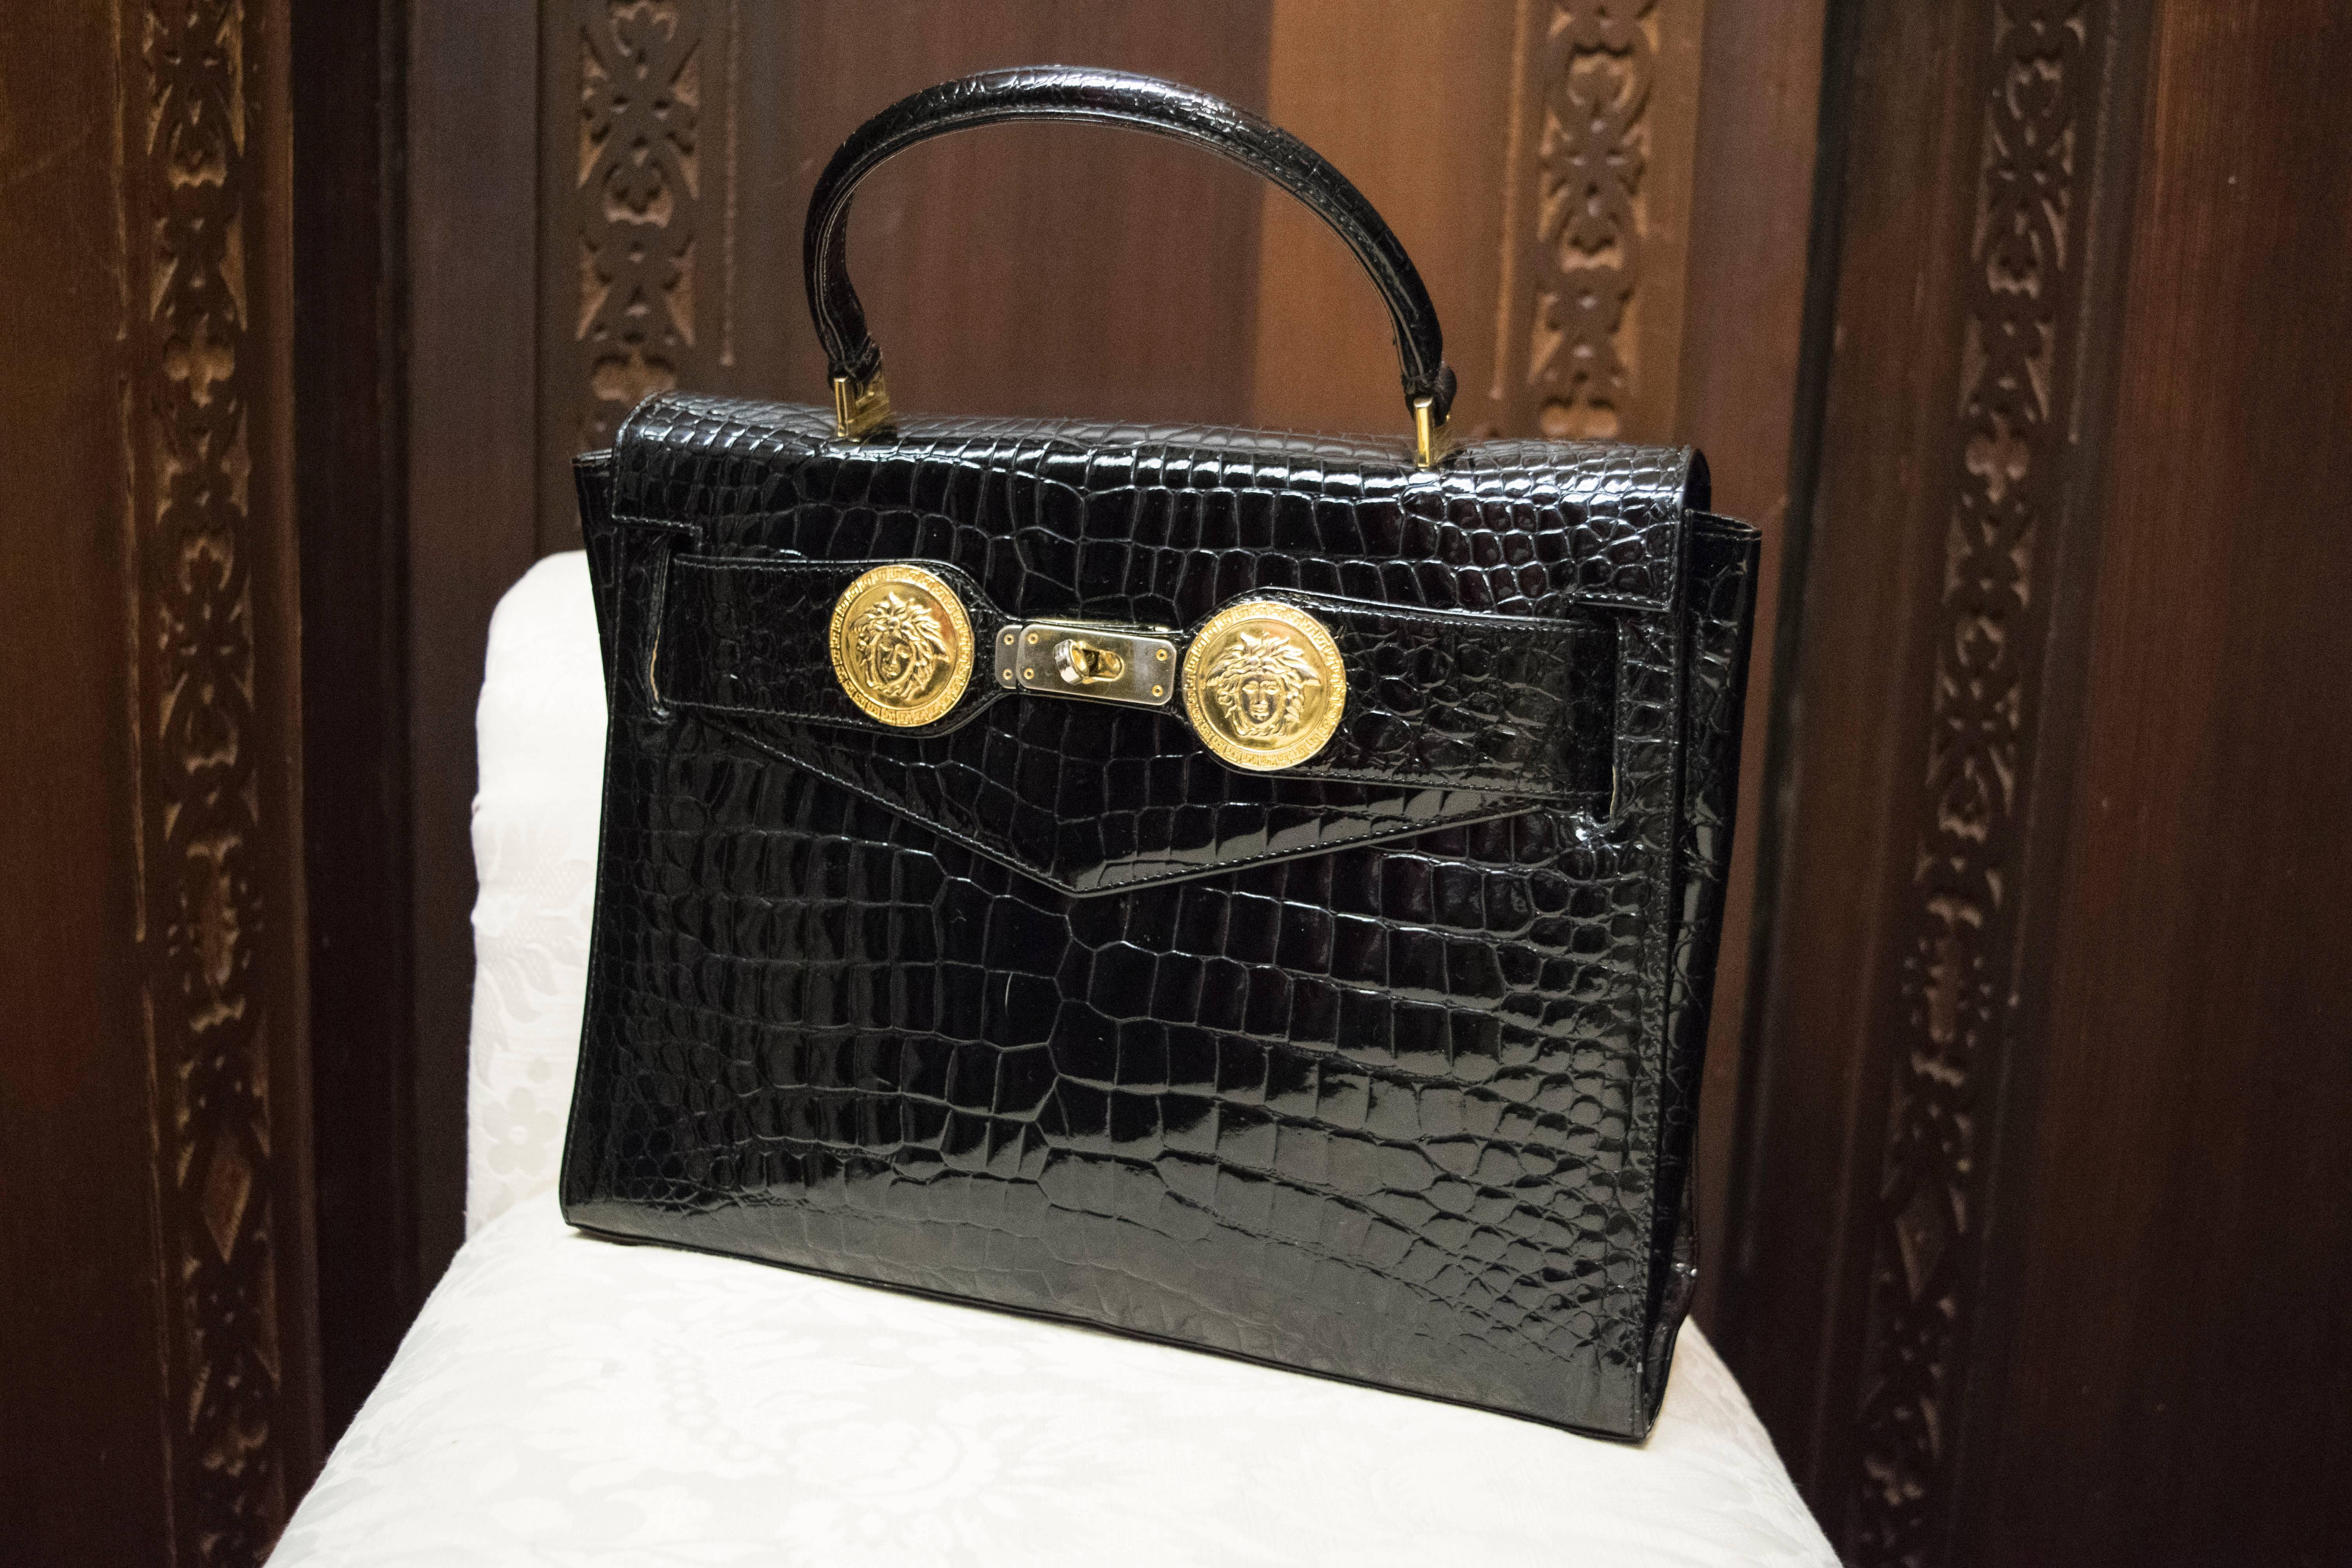 1980s Gianni Versace Embossed Crocodile Handbag.
A sleek and elegant Versace embossed Crocodile handbag with beautiful Medusa head detailing. Comes with dust cover and shoulder strap. 
Slight tarnish on clasp.  

W 12
H 9
D 4